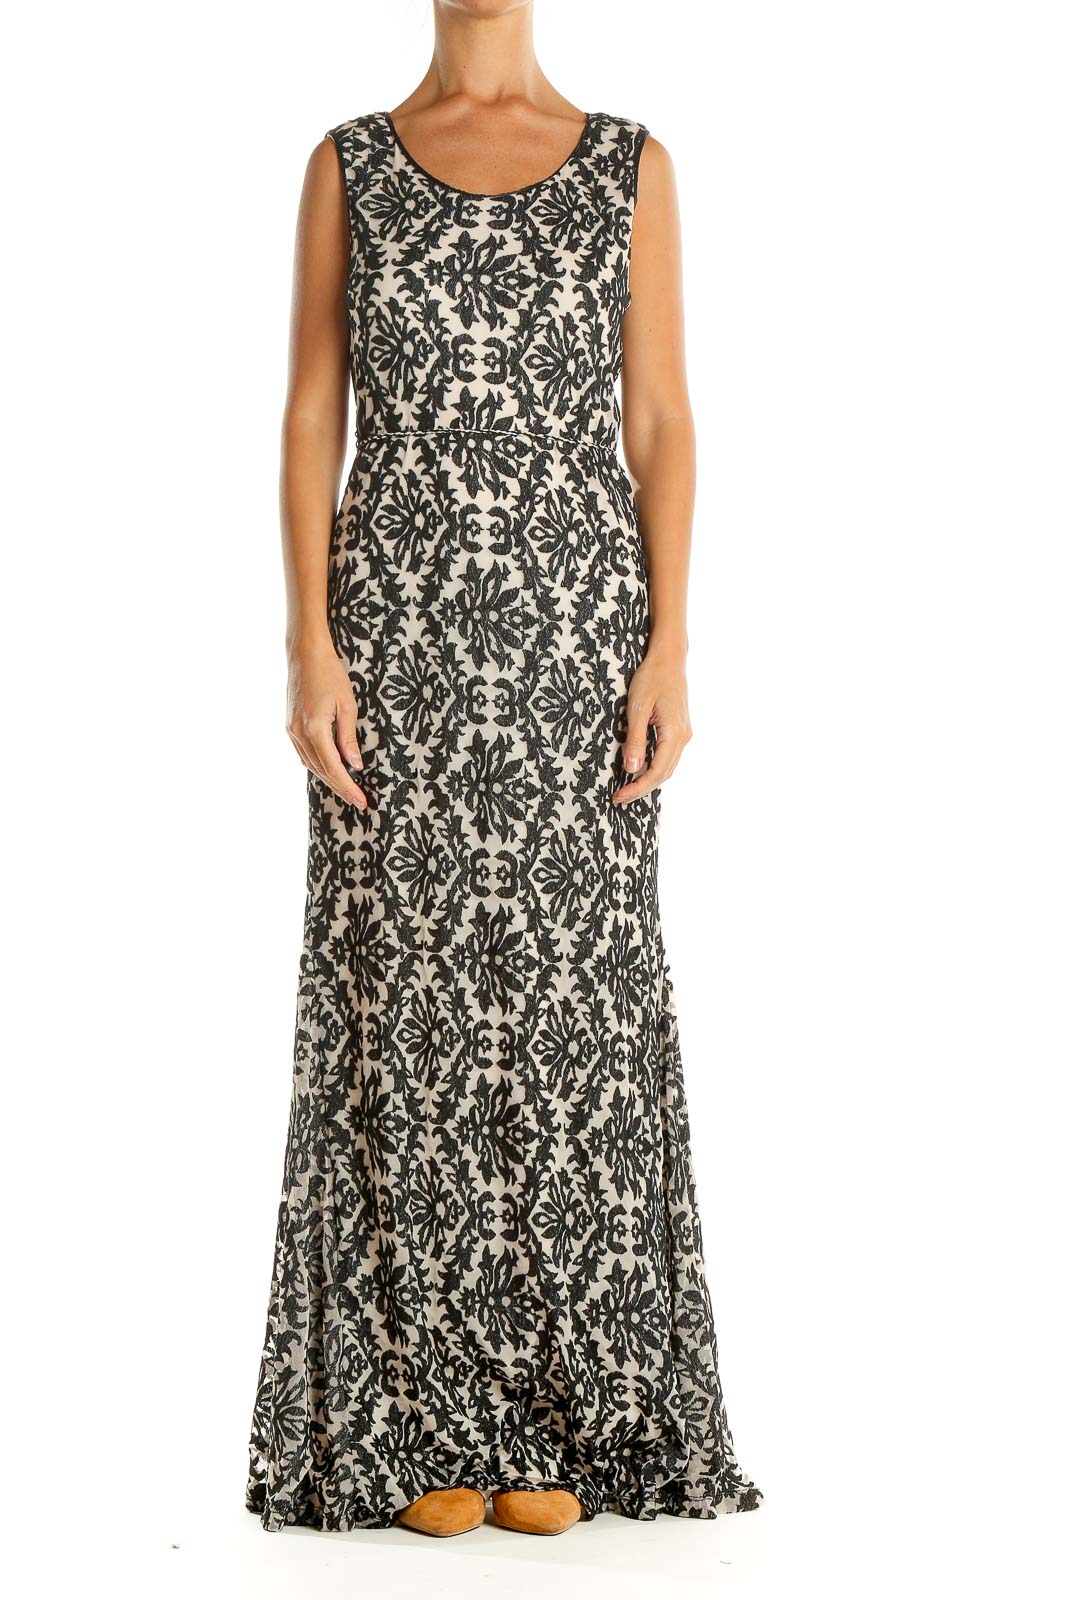 Black Printed Casual Column Dress Front